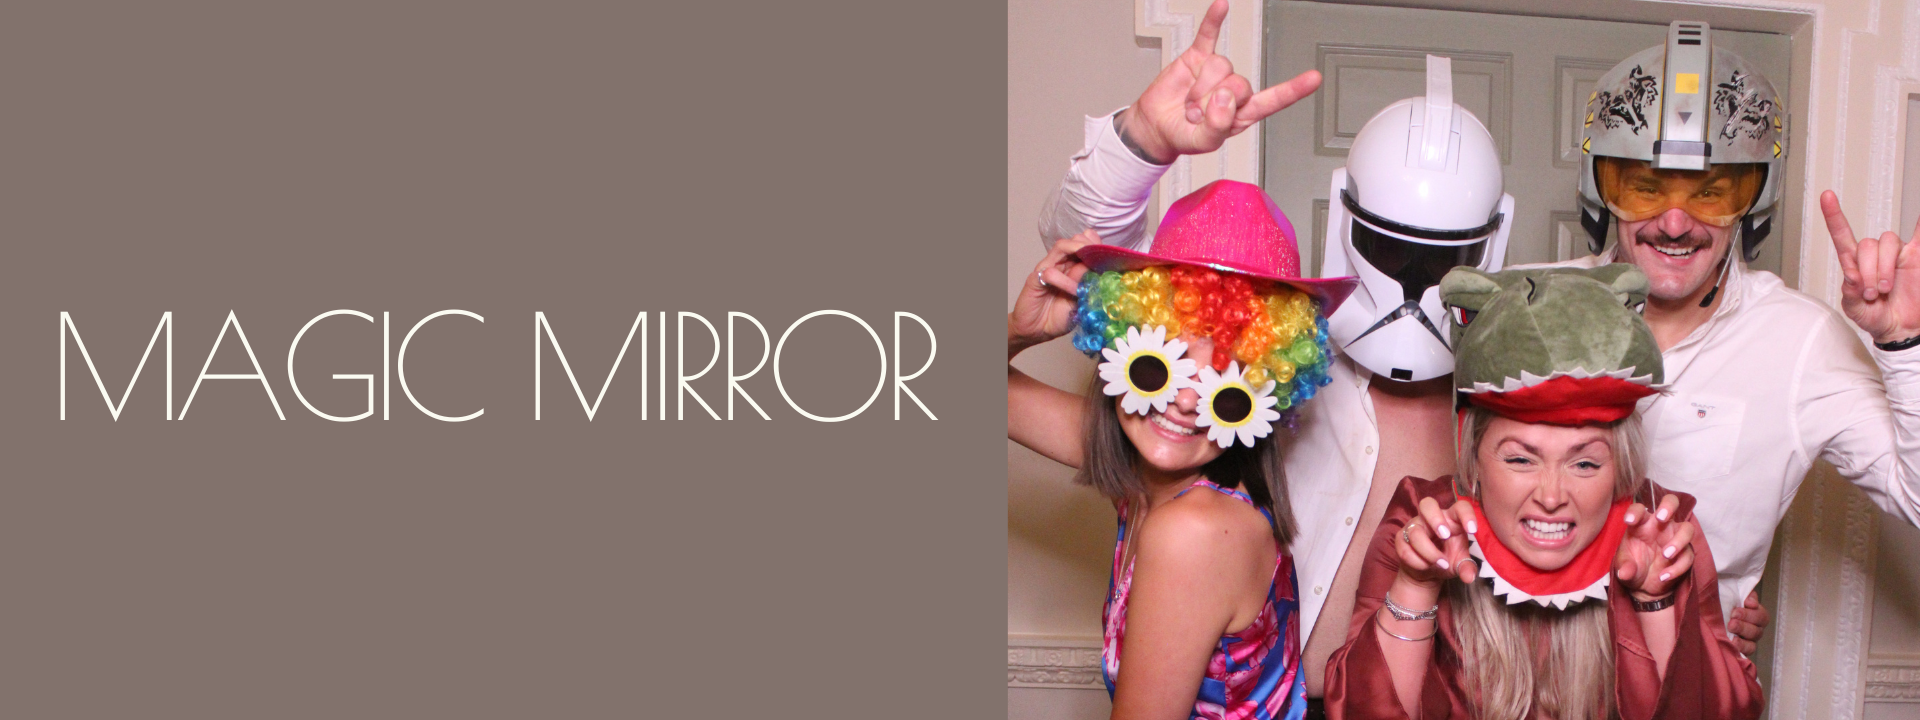 Magic Mirror vs Photo Booth vs Pod what is best?